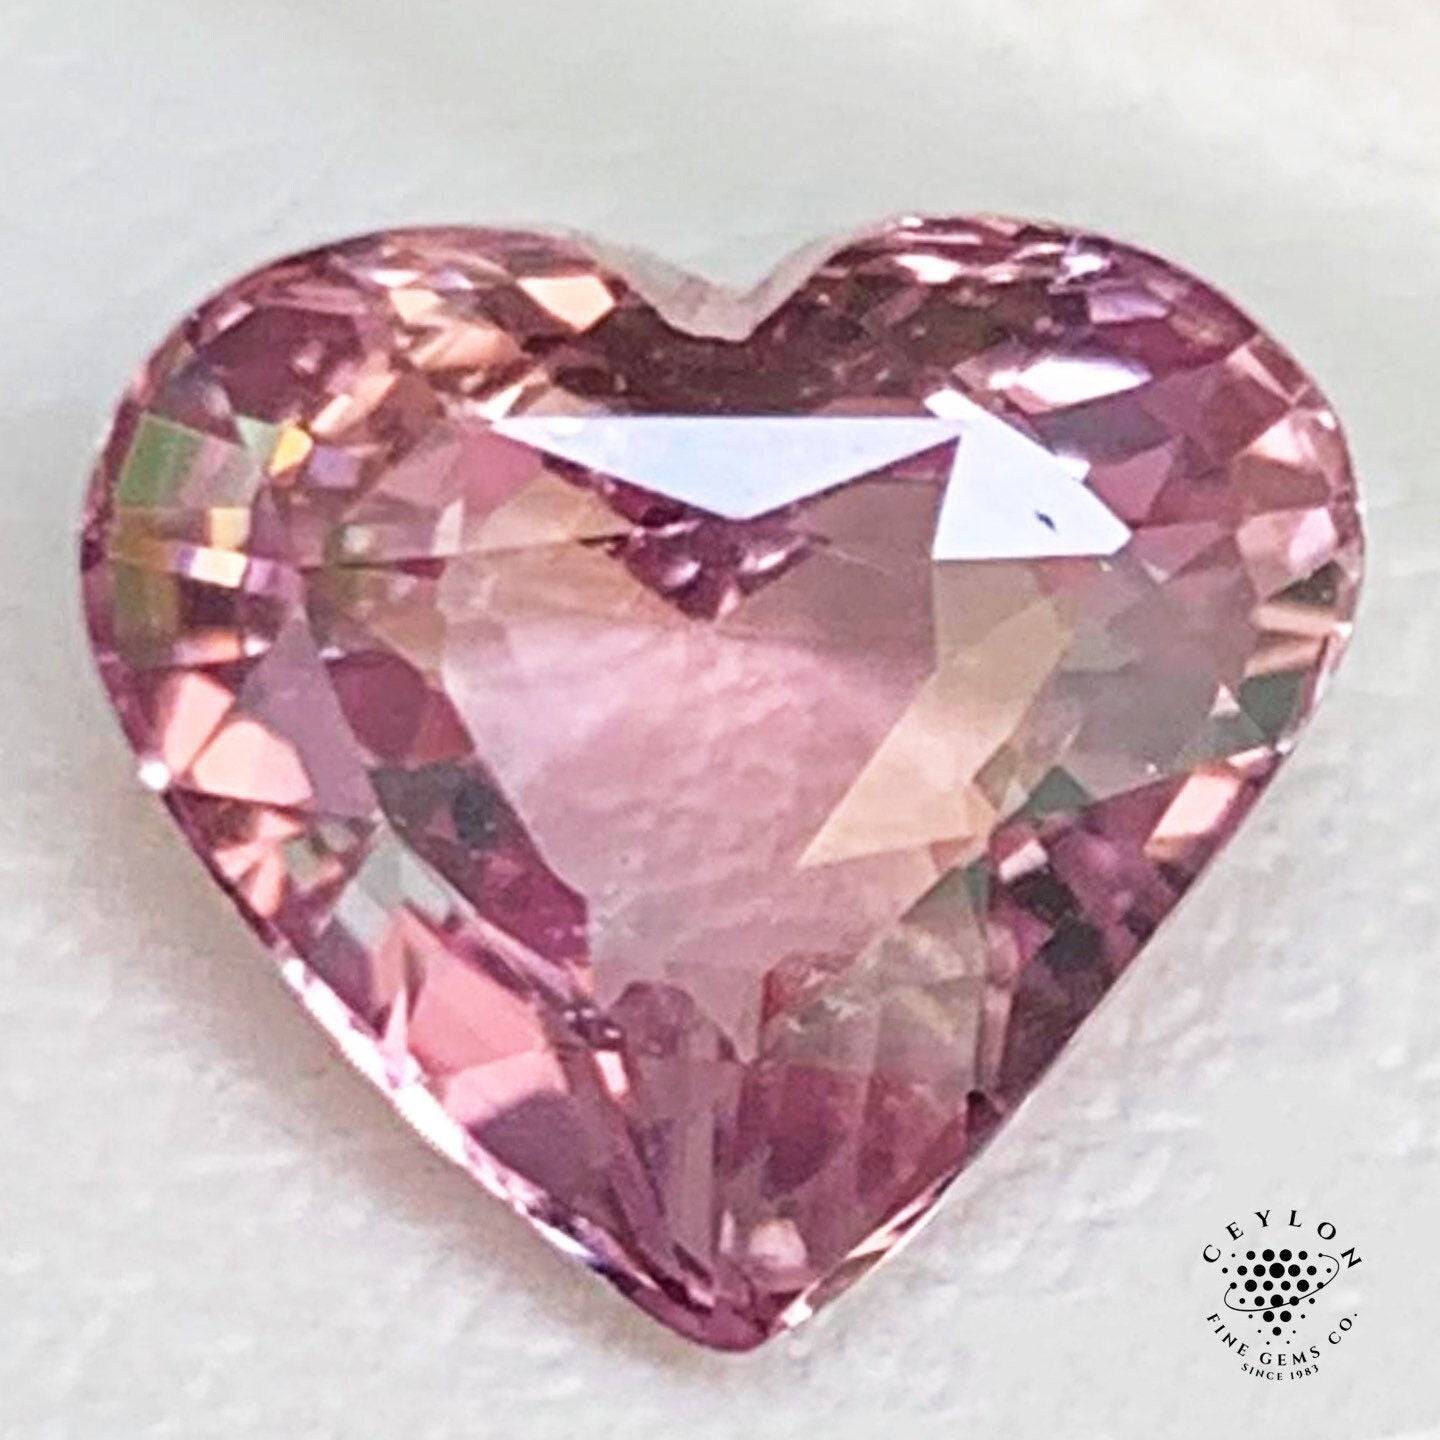 3.03 Cts Unheated Padparadscha Sapphire - (UH) - Baza Boutique 